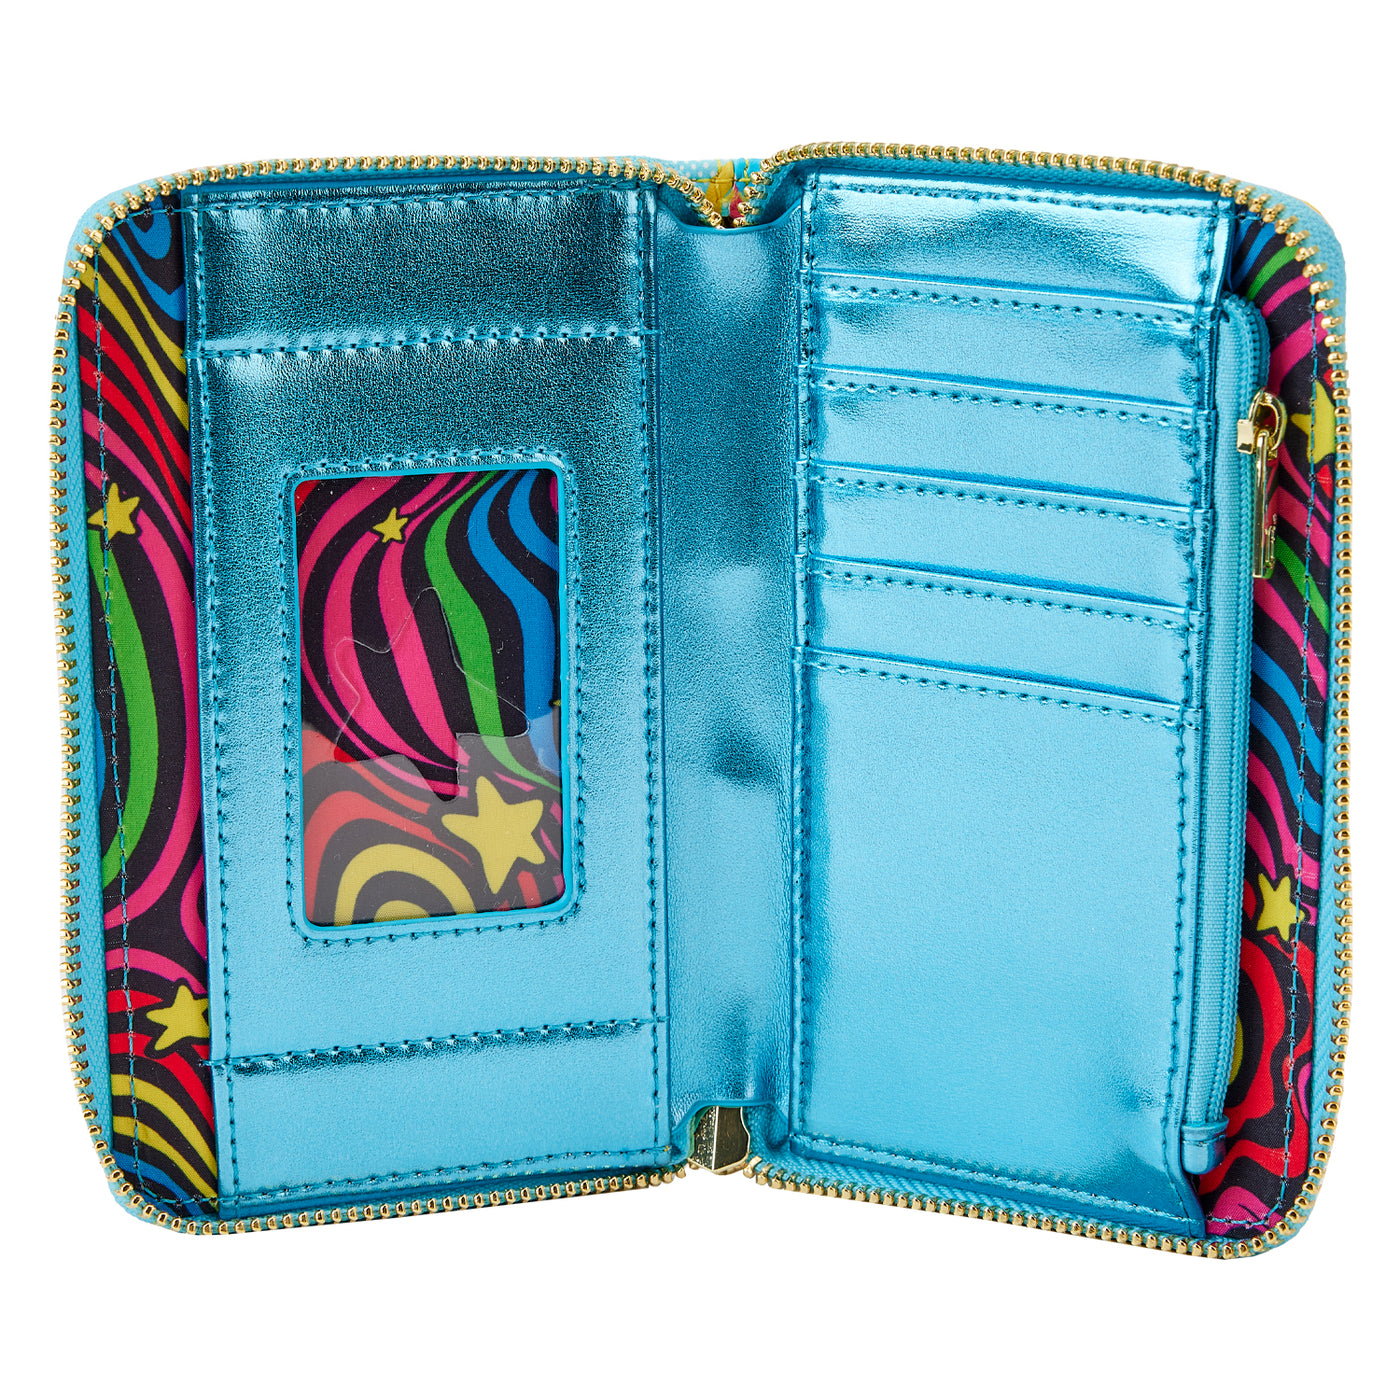 The Beatles Magical Mystery Tour Bus Wallet